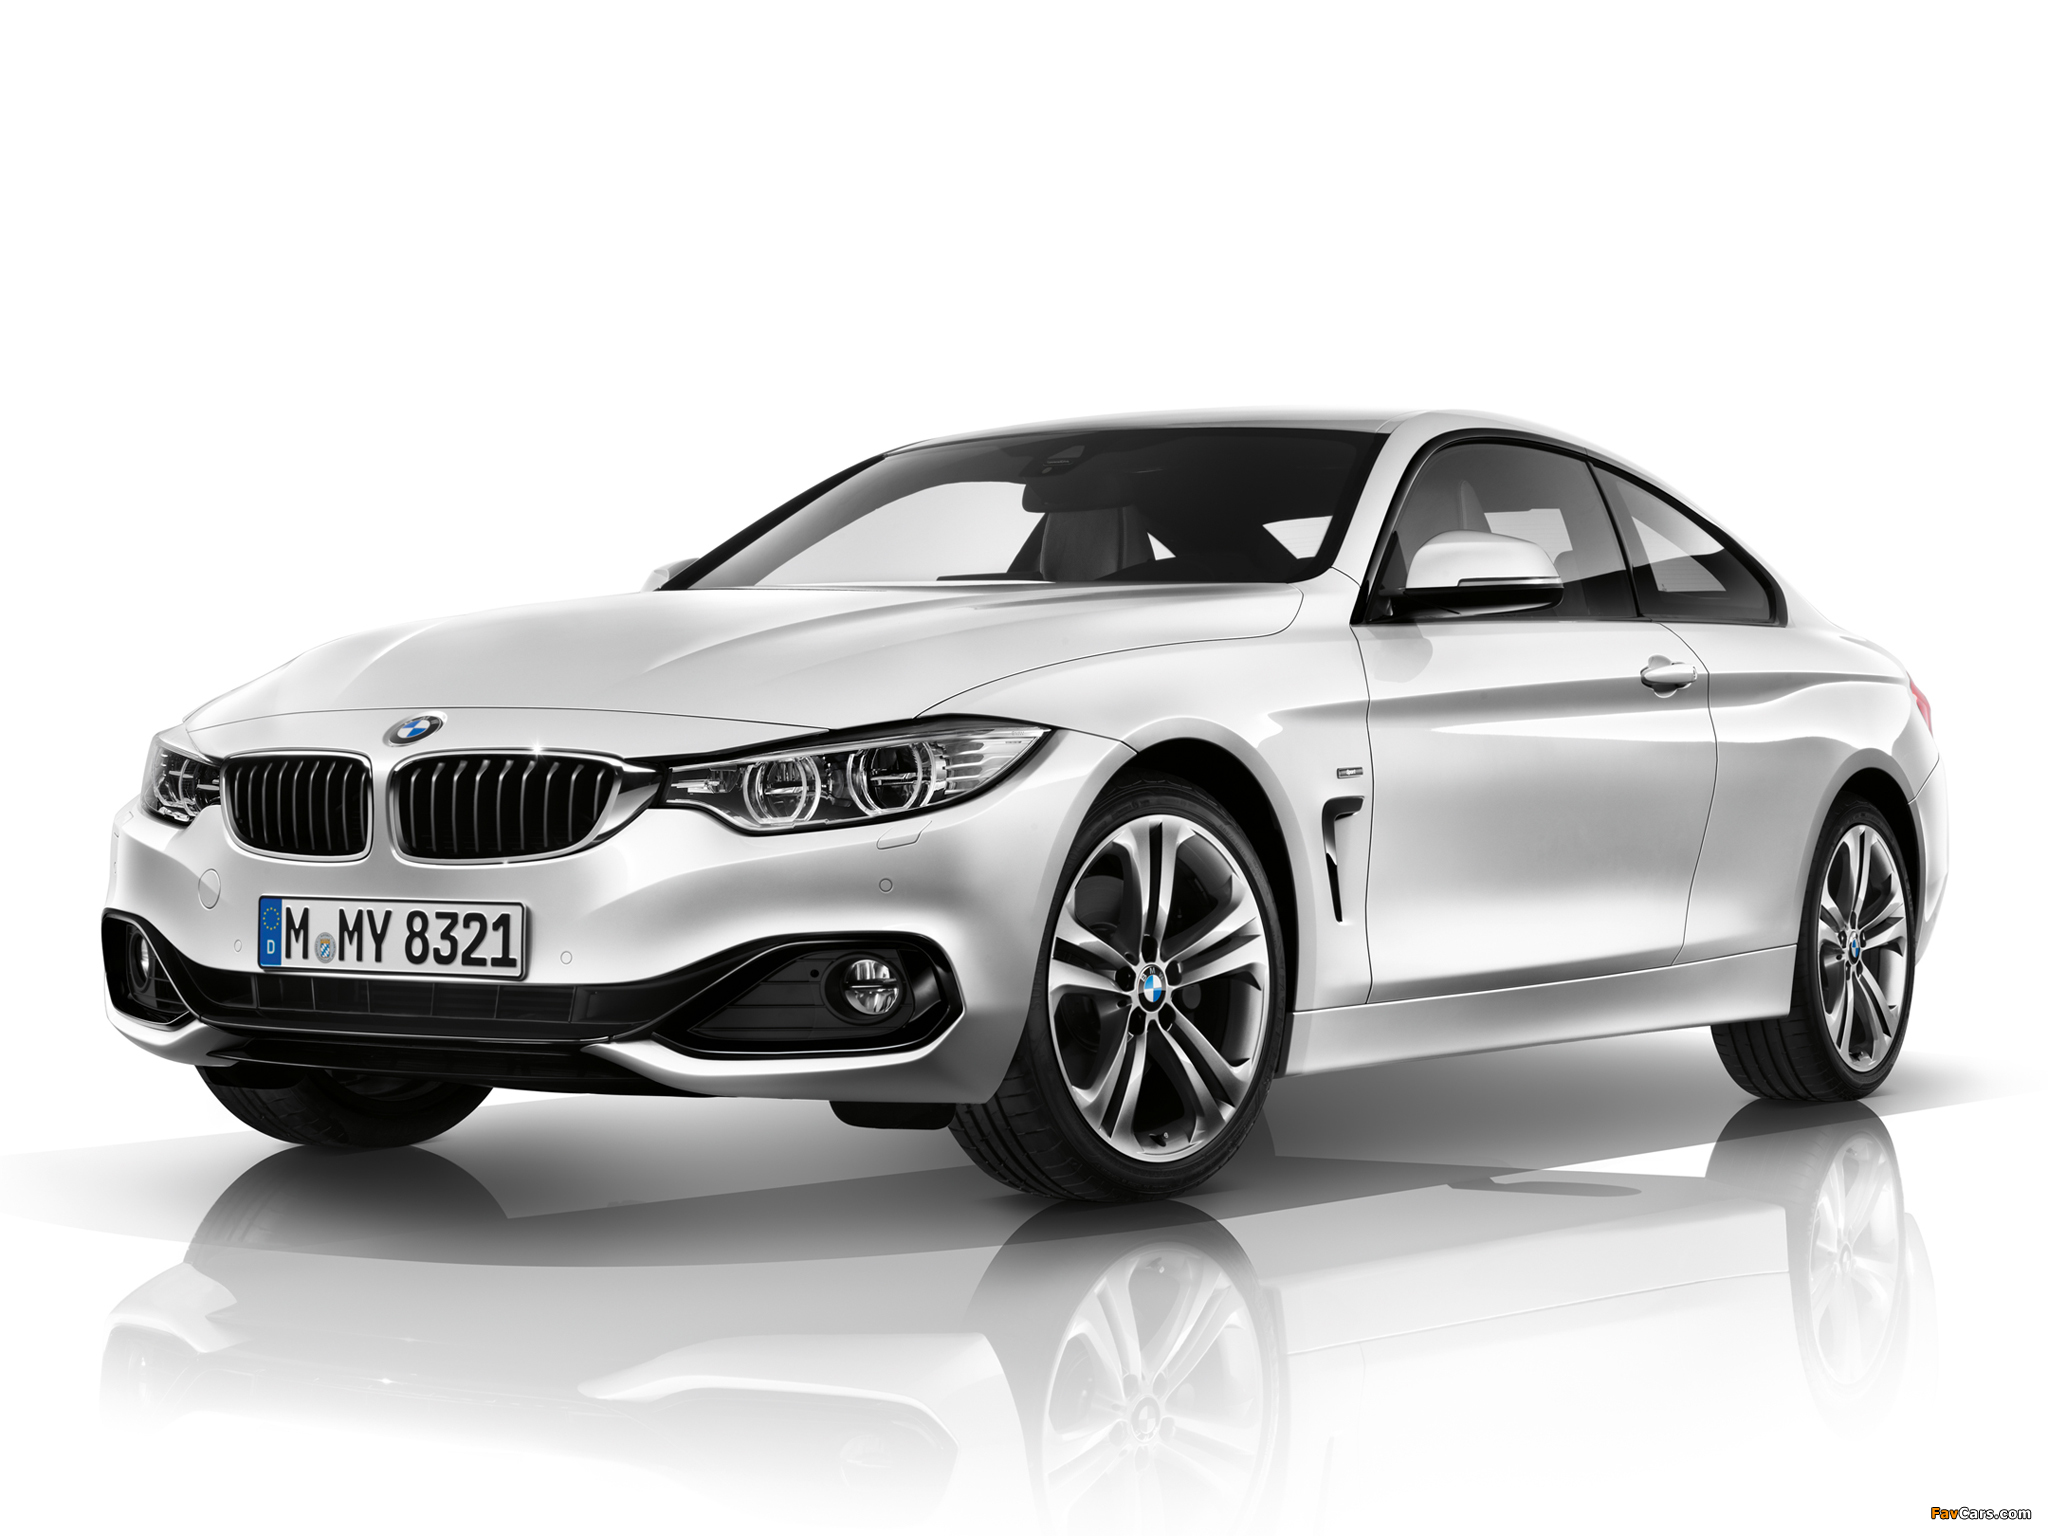 BMW 435i xDrive Coupé Sport Line (F32) 2013 pictures (2048 x 1536)